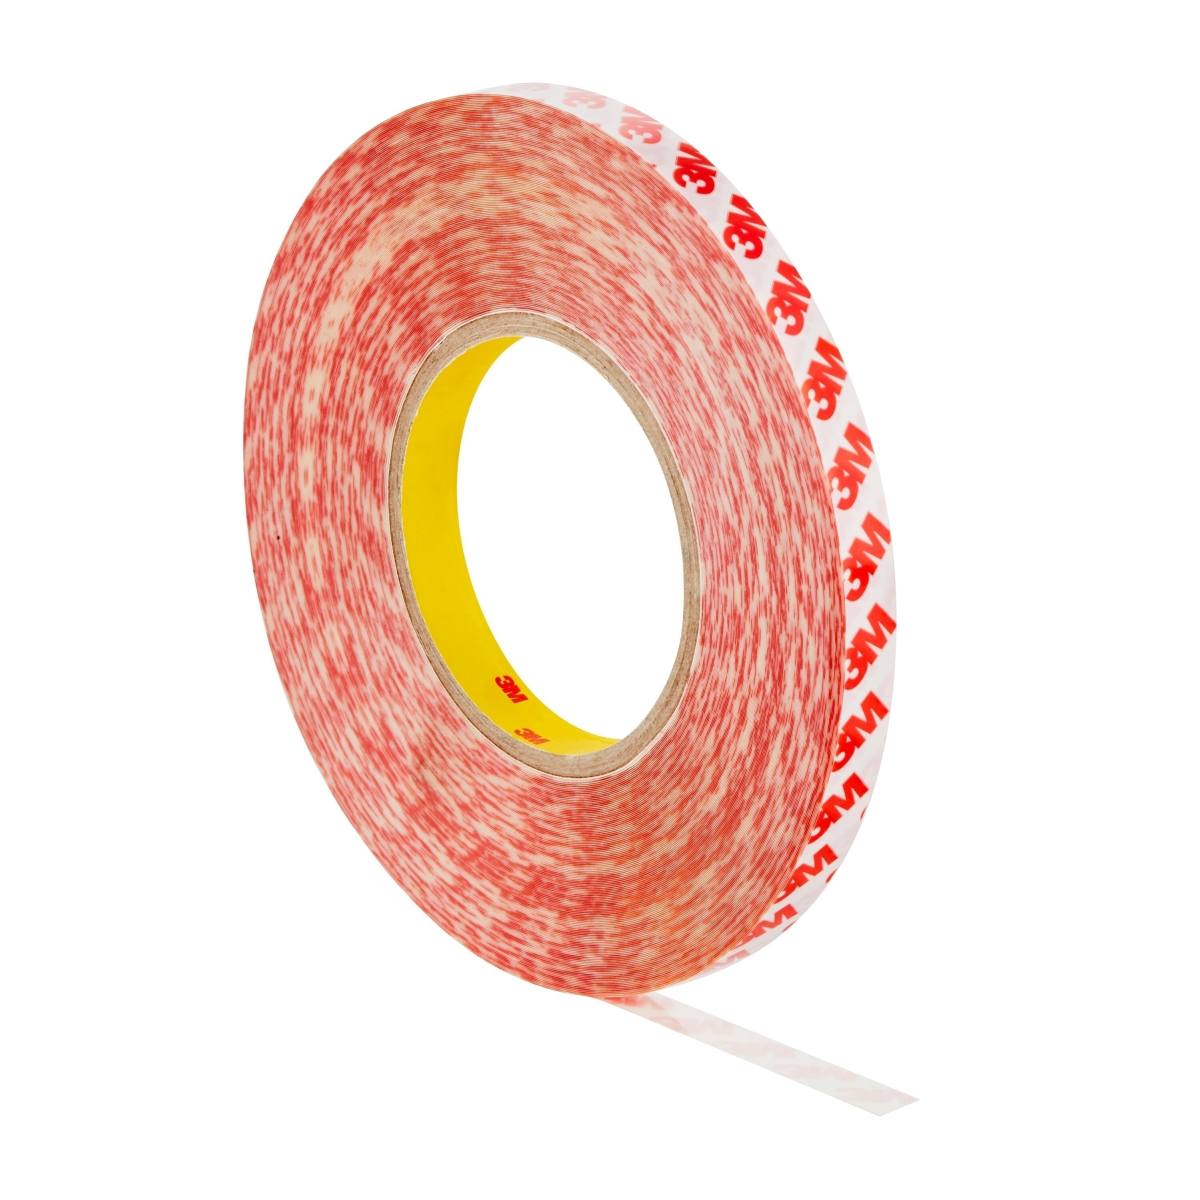 3M Double-sided adhesive tape with polyester backing GPT-020F, transparent, 15 mm x 50 m, 0.202 mm